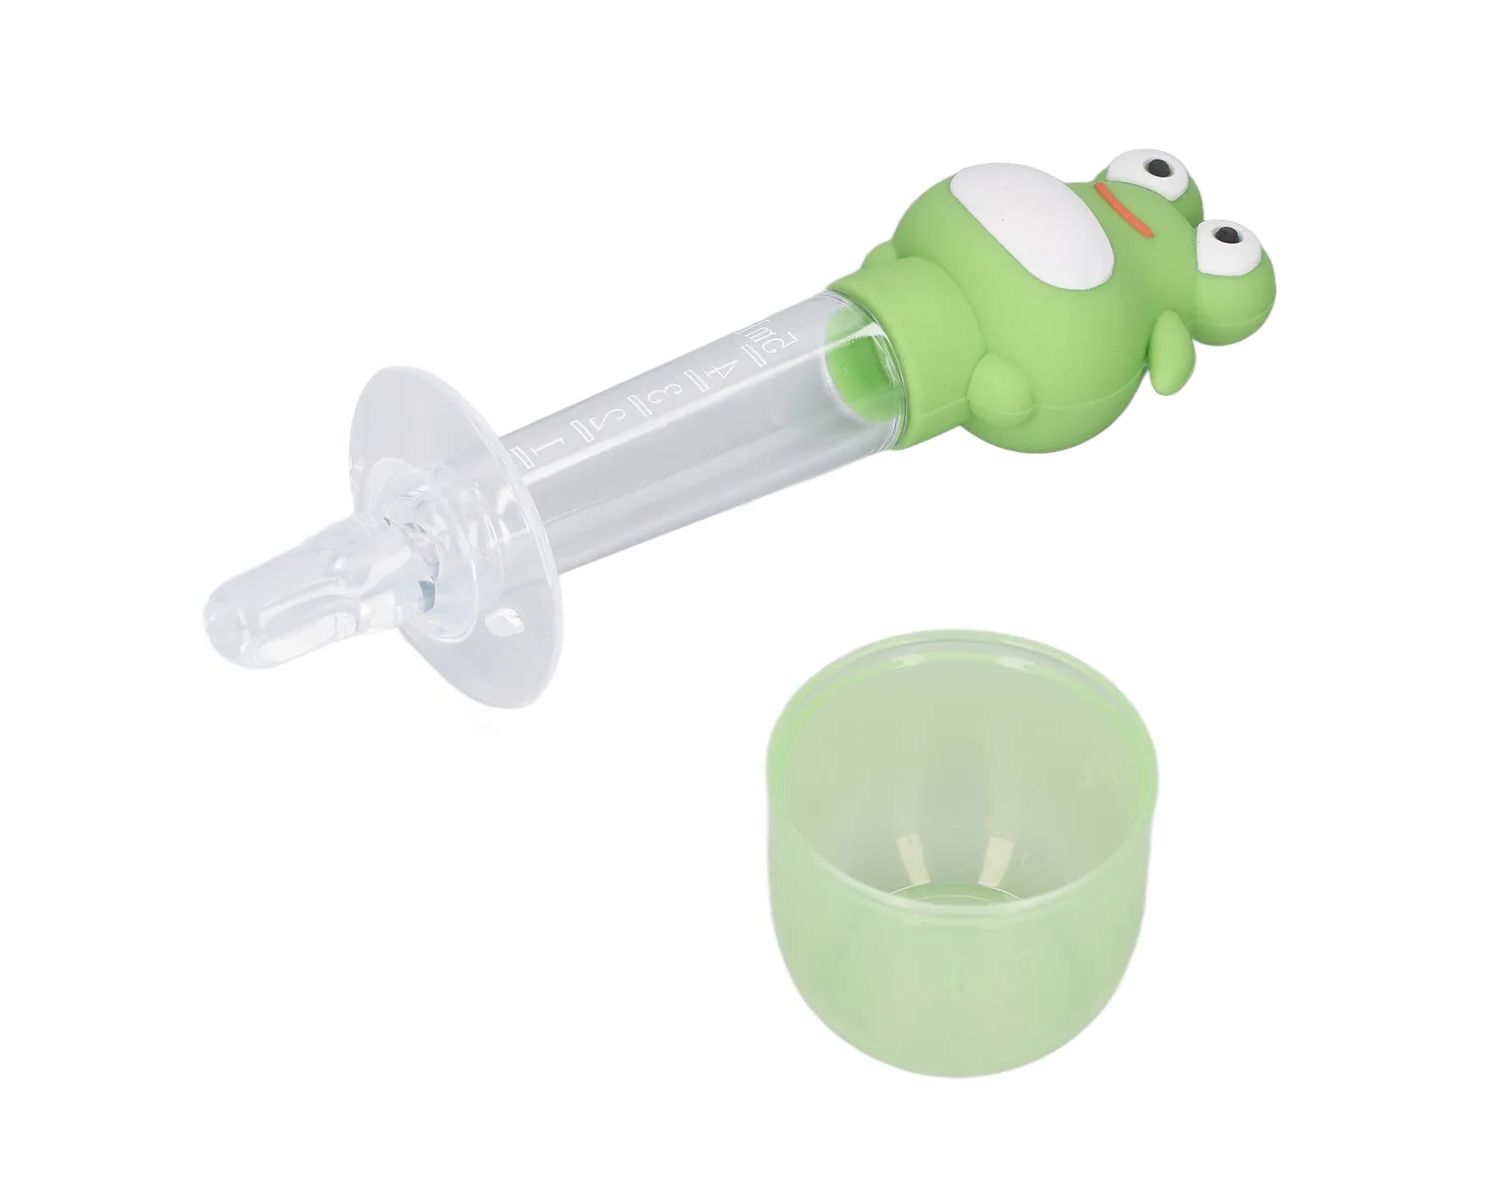 Review: Baby Medicine Dispenser – A Must-Have for Parents